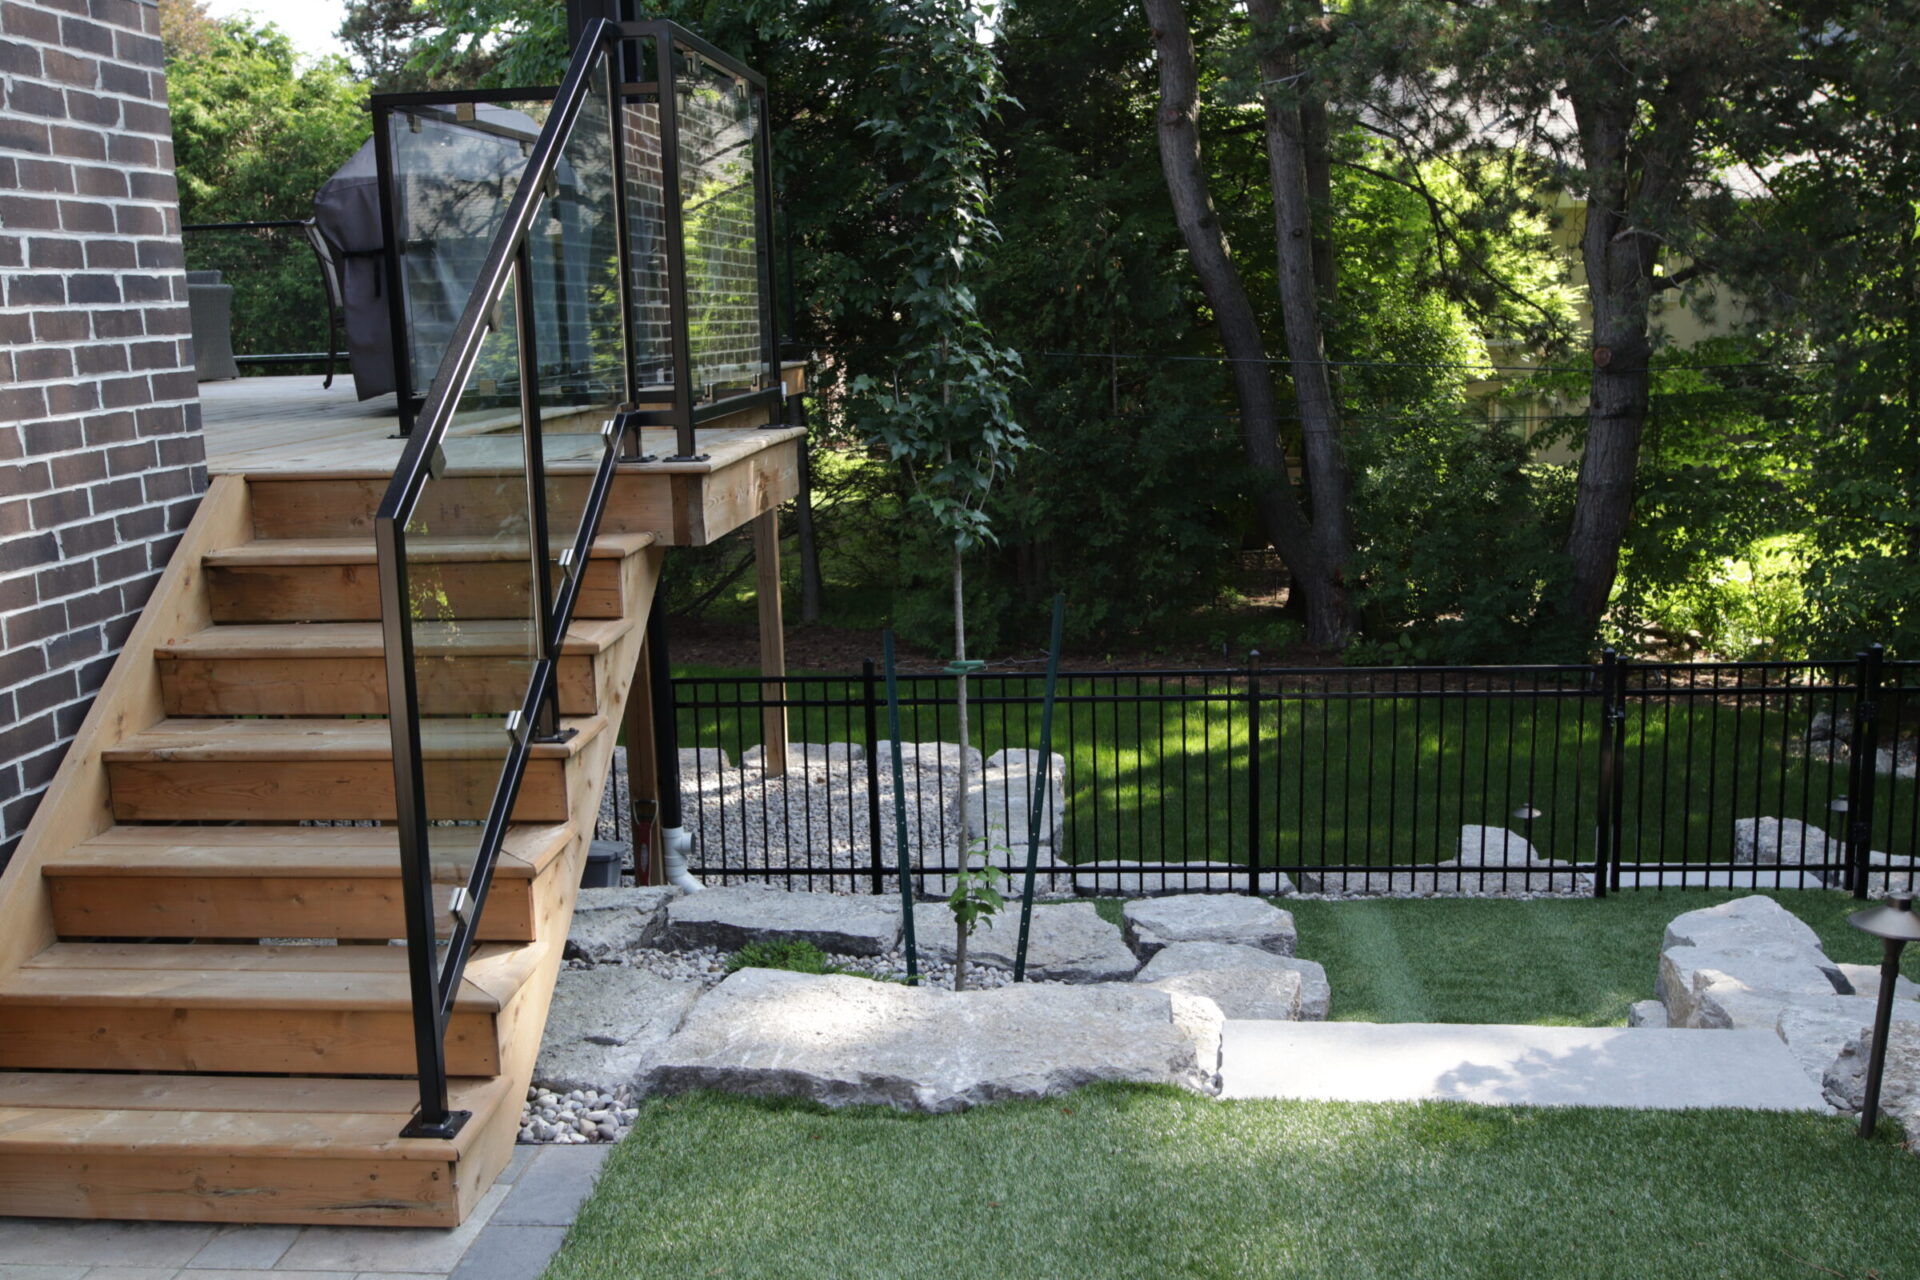 This image shows a wooden staircase with a metal railing leading to a deck. A well-kept lawn, stone landscaping, and a metal fence are visible.